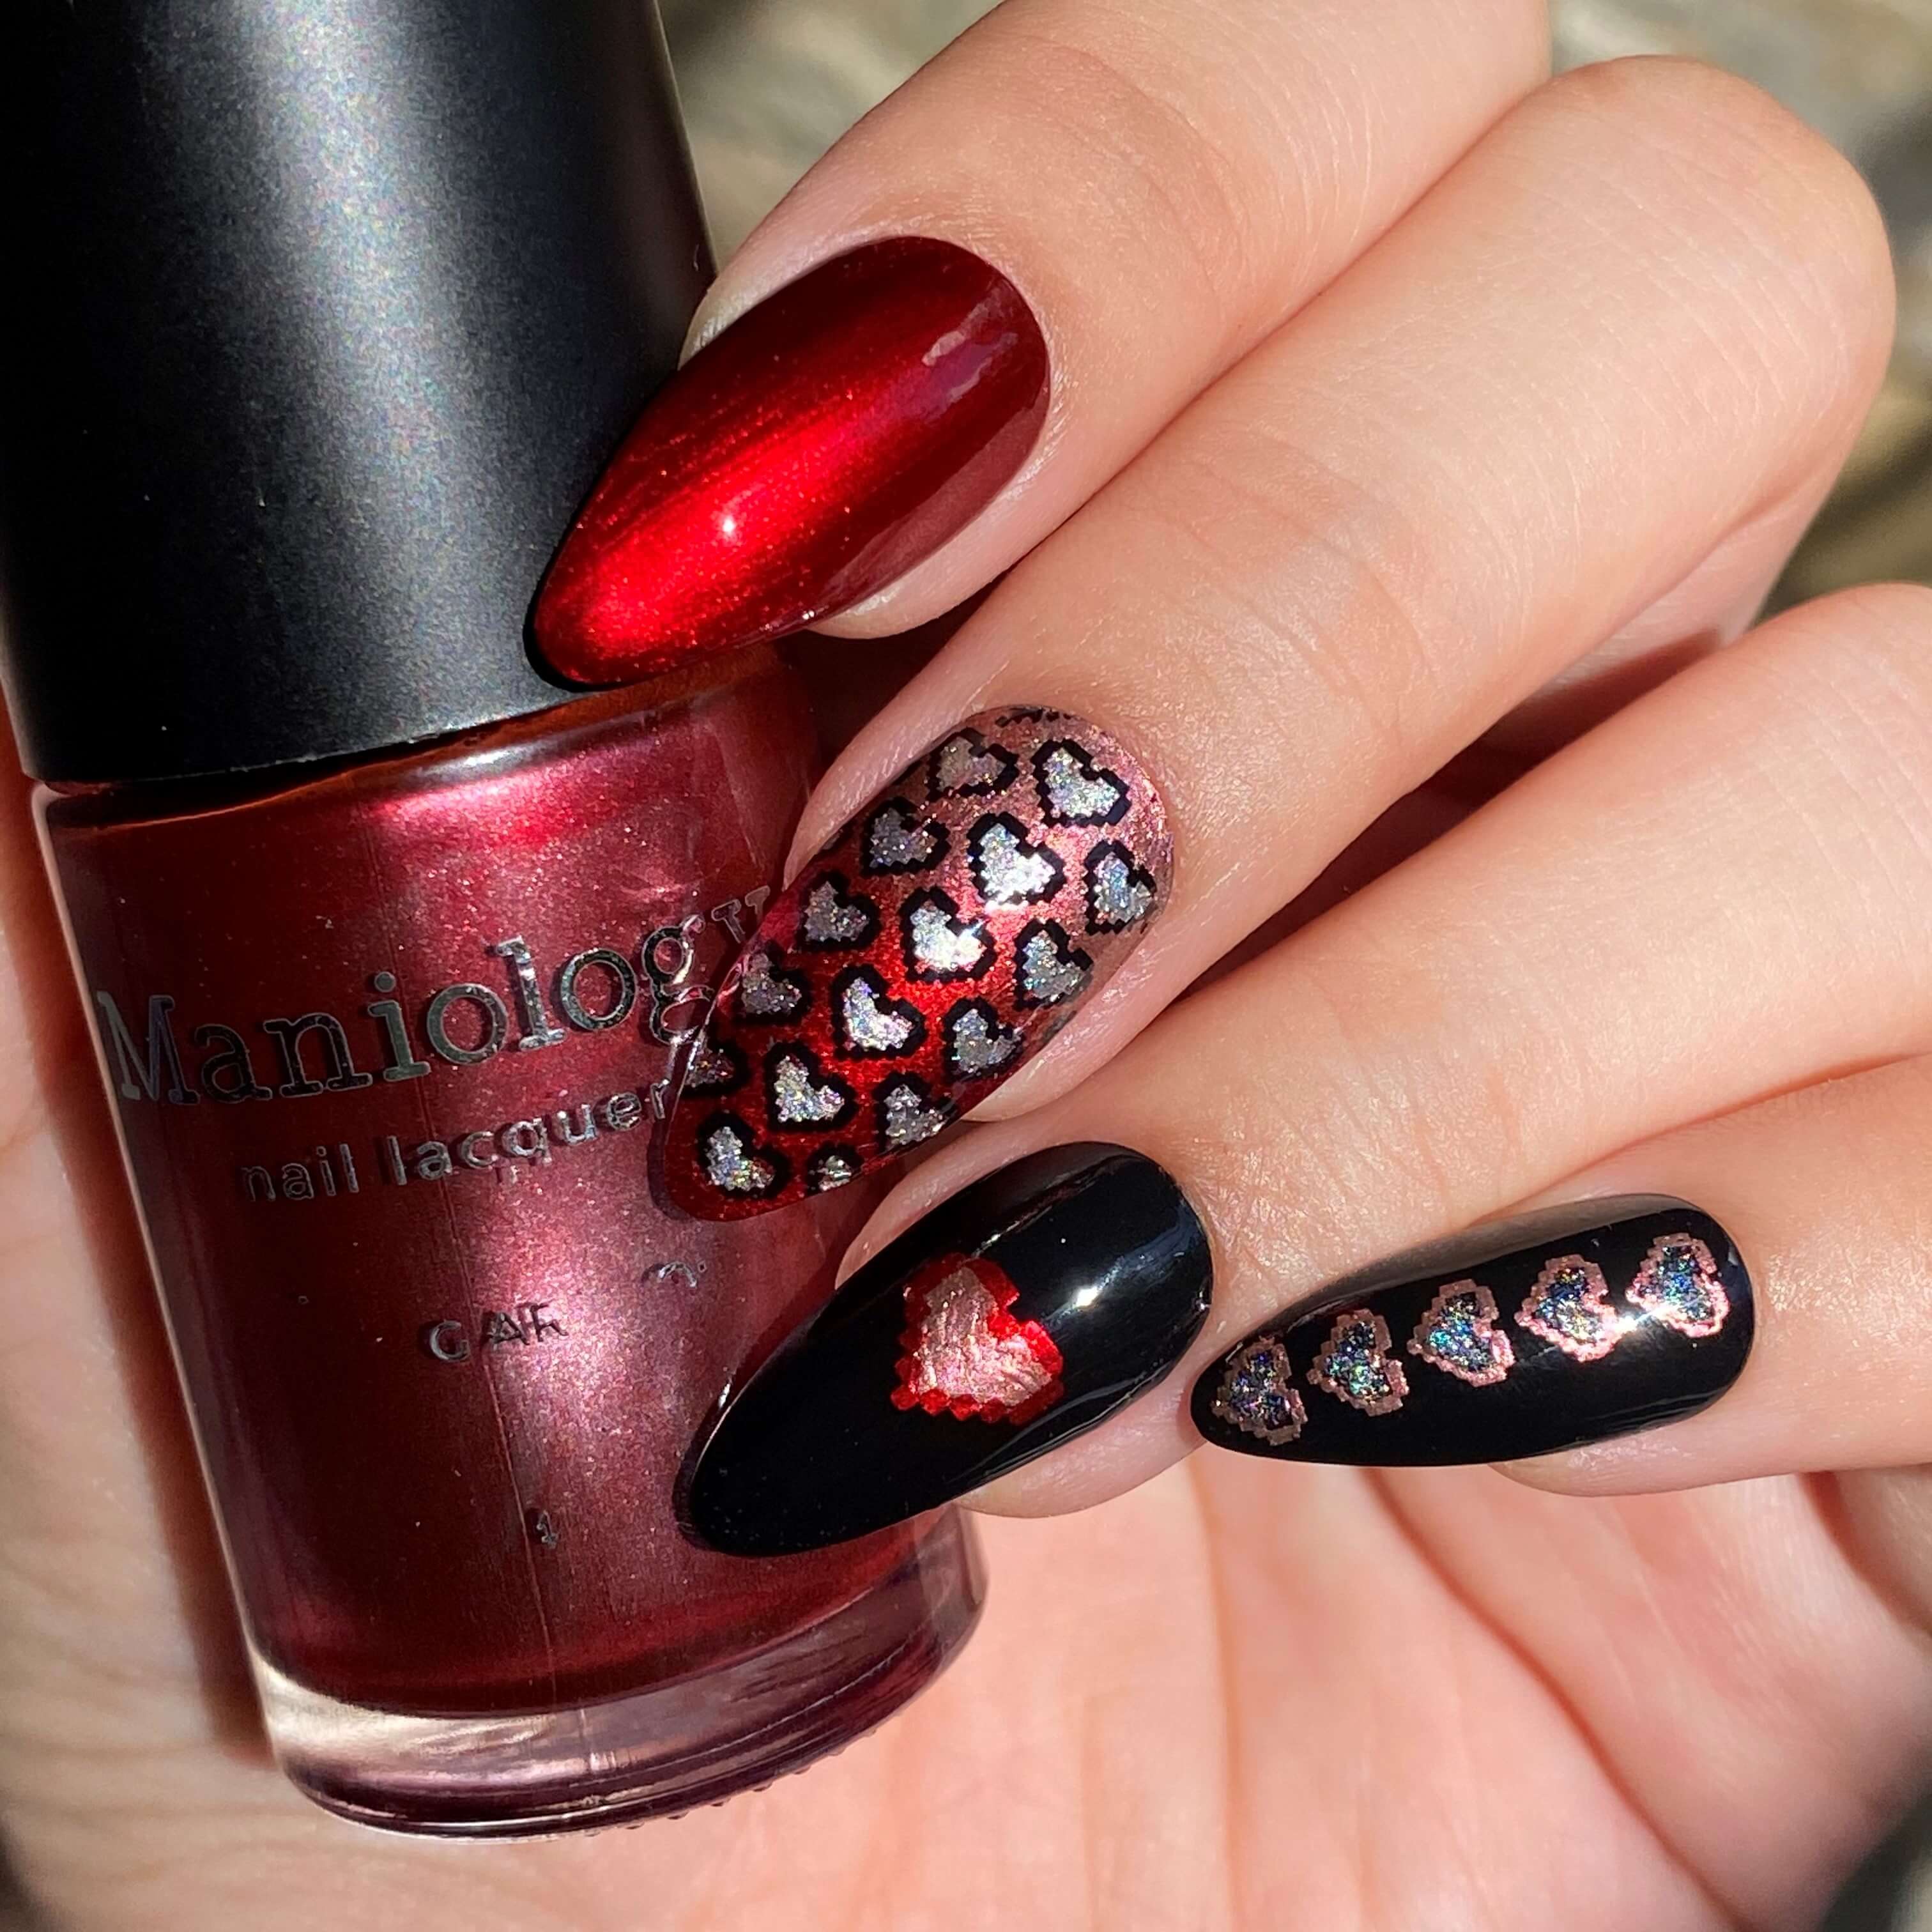 56 Valentine's Day nail art ideas we're crushing on | Minimalist nails,  Heart nails, Nails